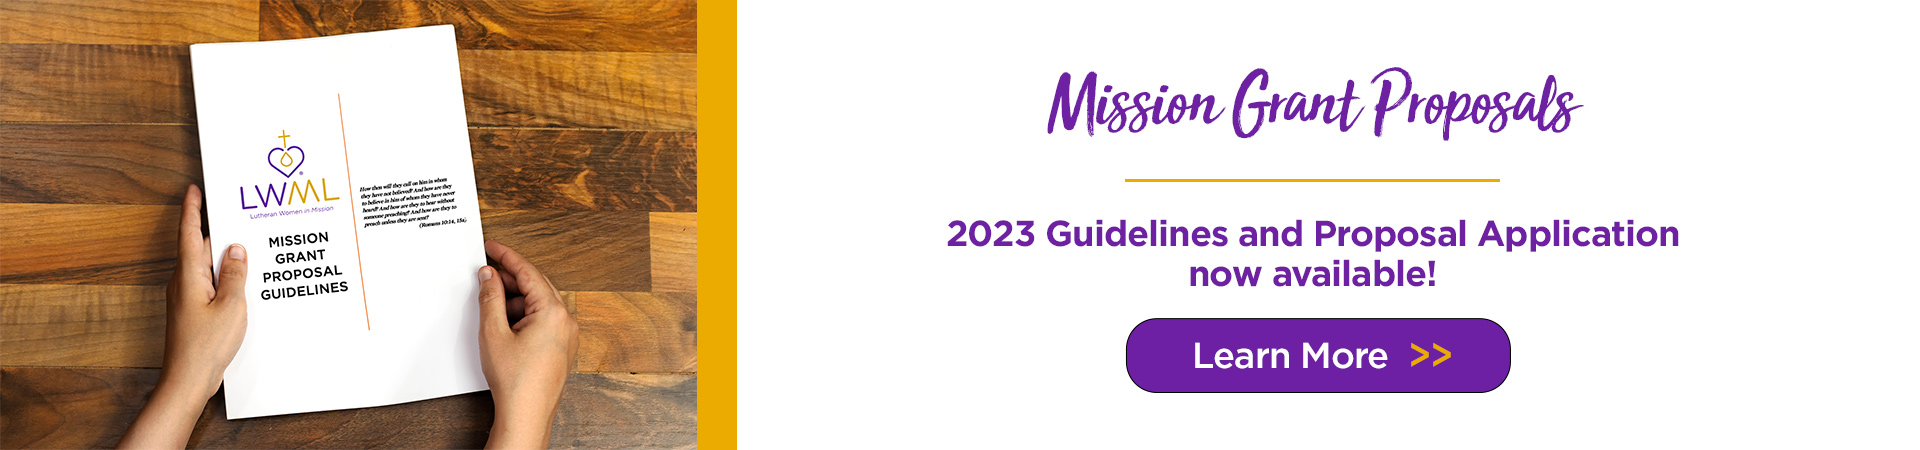 Mission Grant Proposals: Guidelines and Proposal Application now available. Learn more.